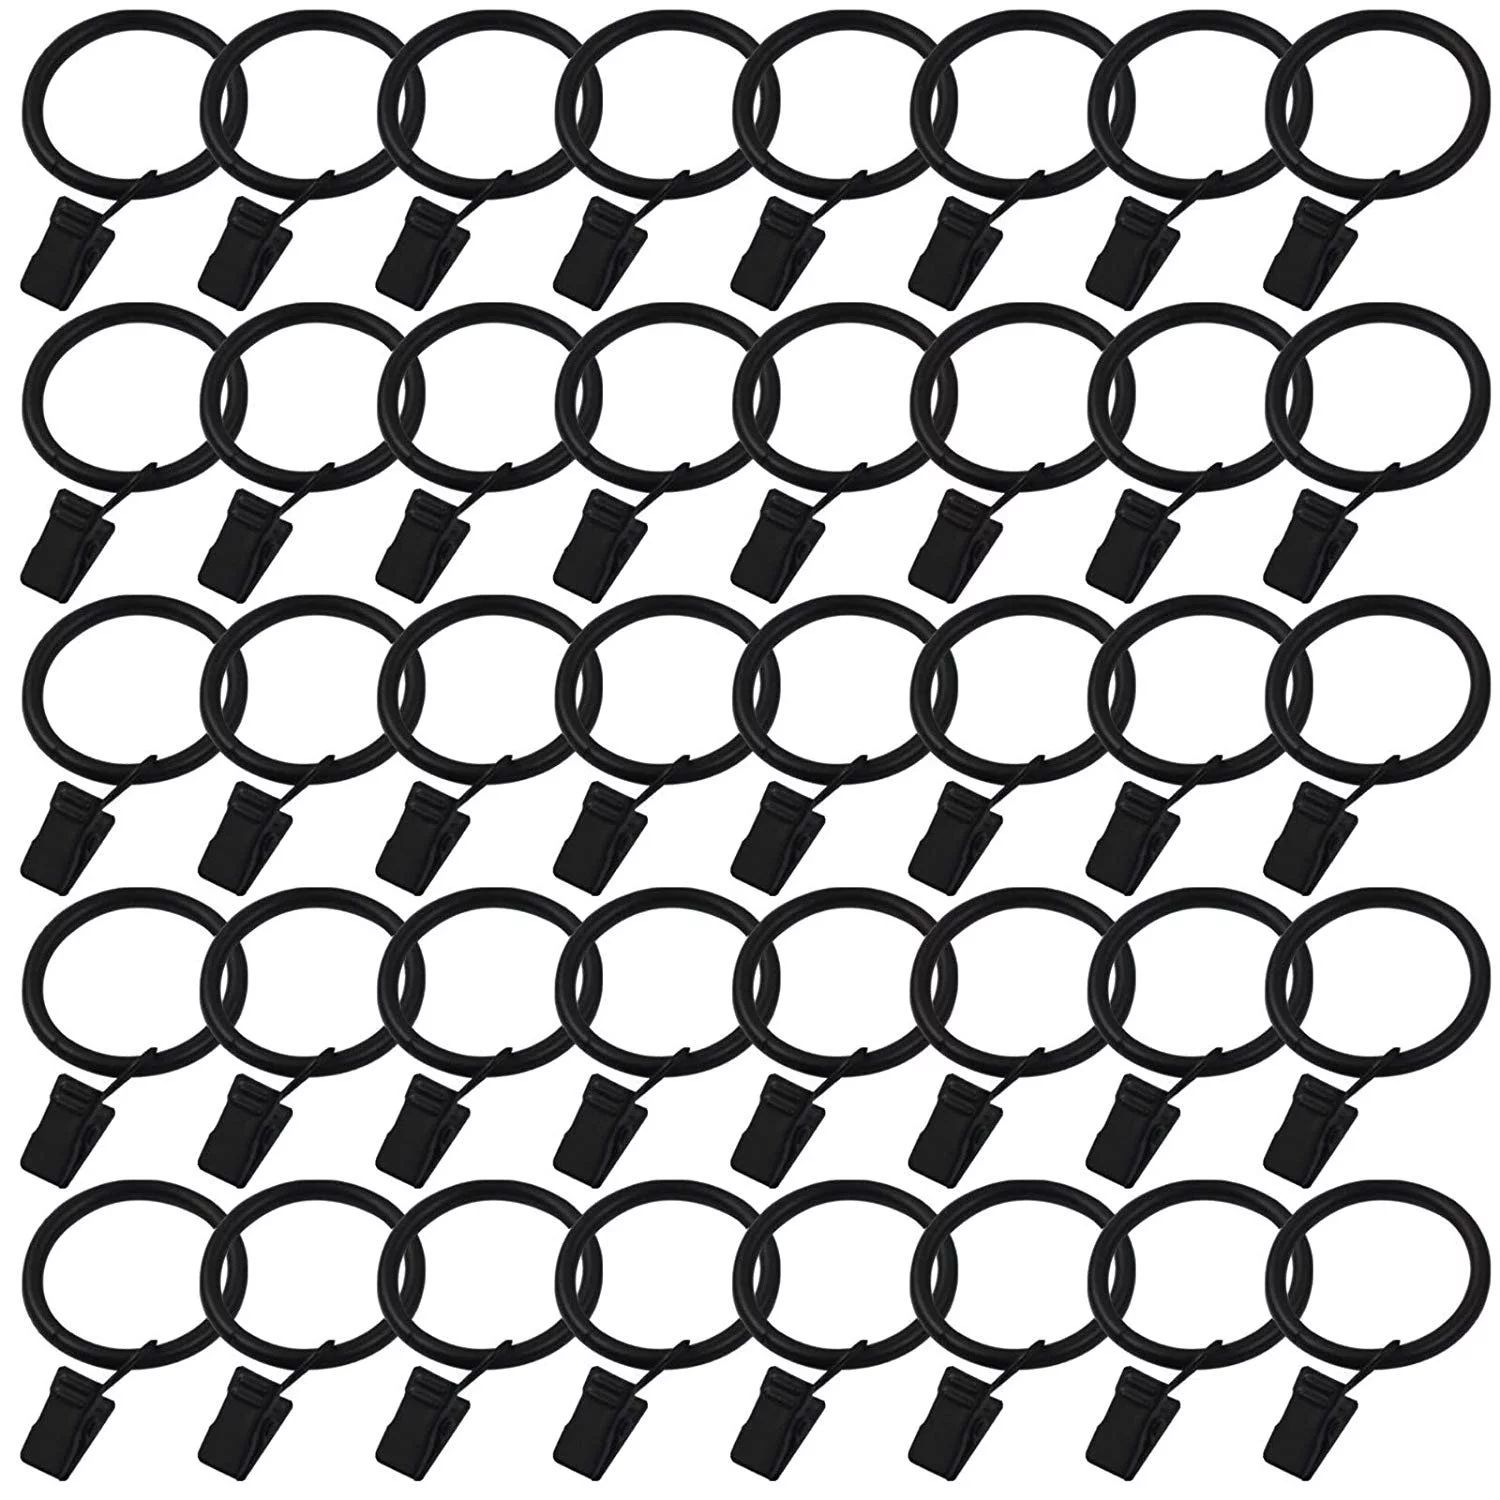 Wideskall 40 Pcs 1.5" inch Curtain Rings with Clips Gloss Black - Ring Support 66 lbs, Strong Cli... | Walmart (US)